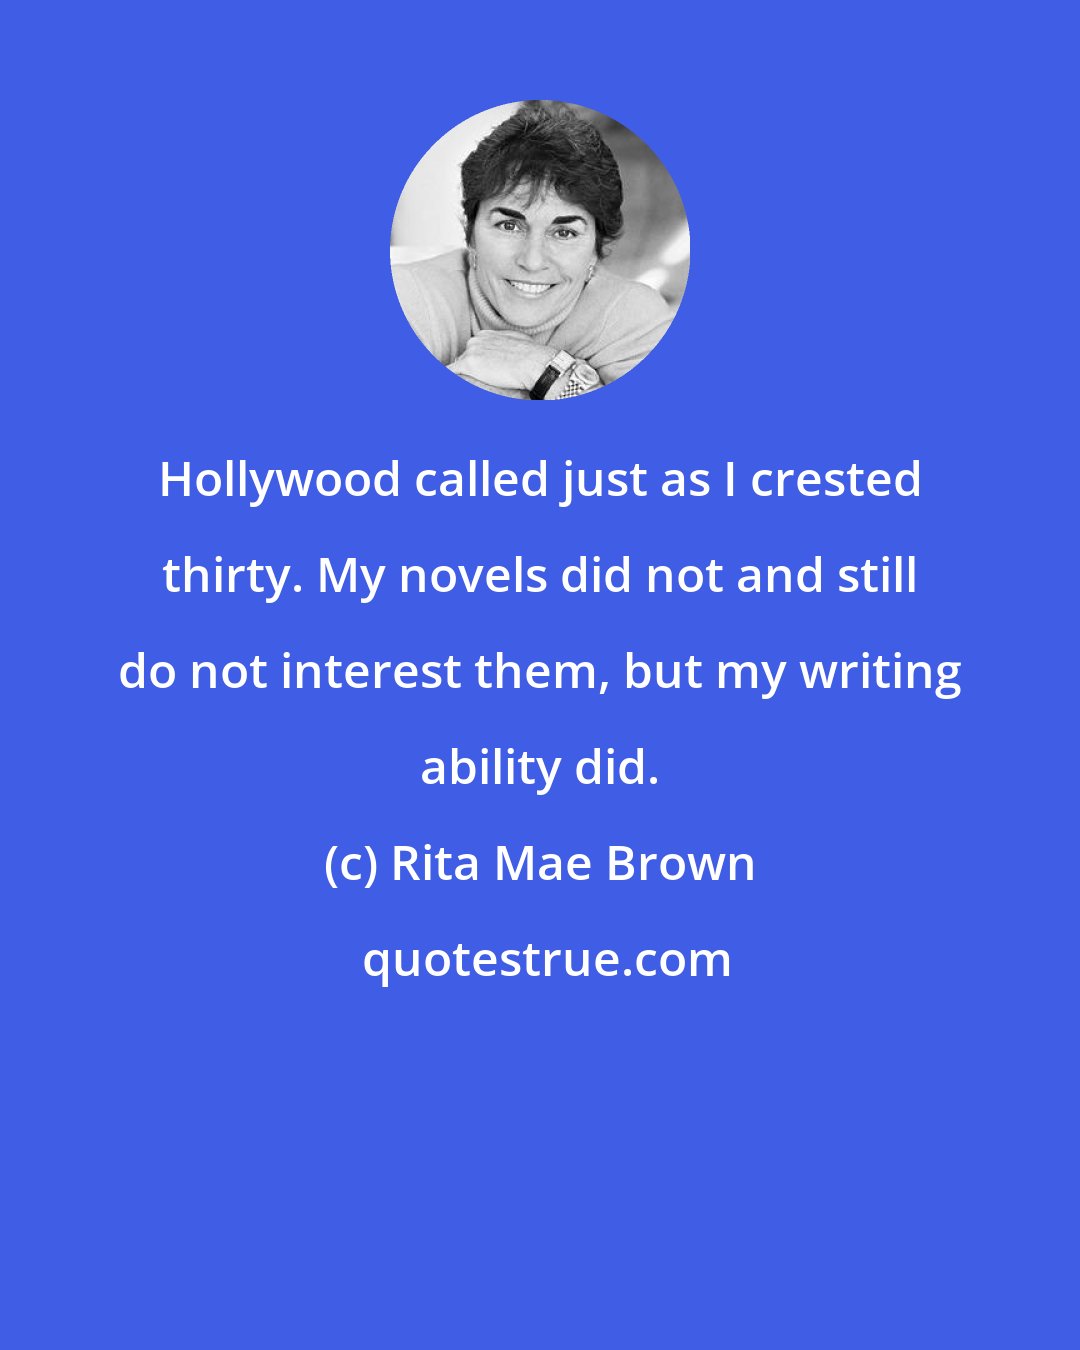 Rita Mae Brown: Hollywood called just as I crested thirty. My novels did not and still do not interest them, but my writing ability did.